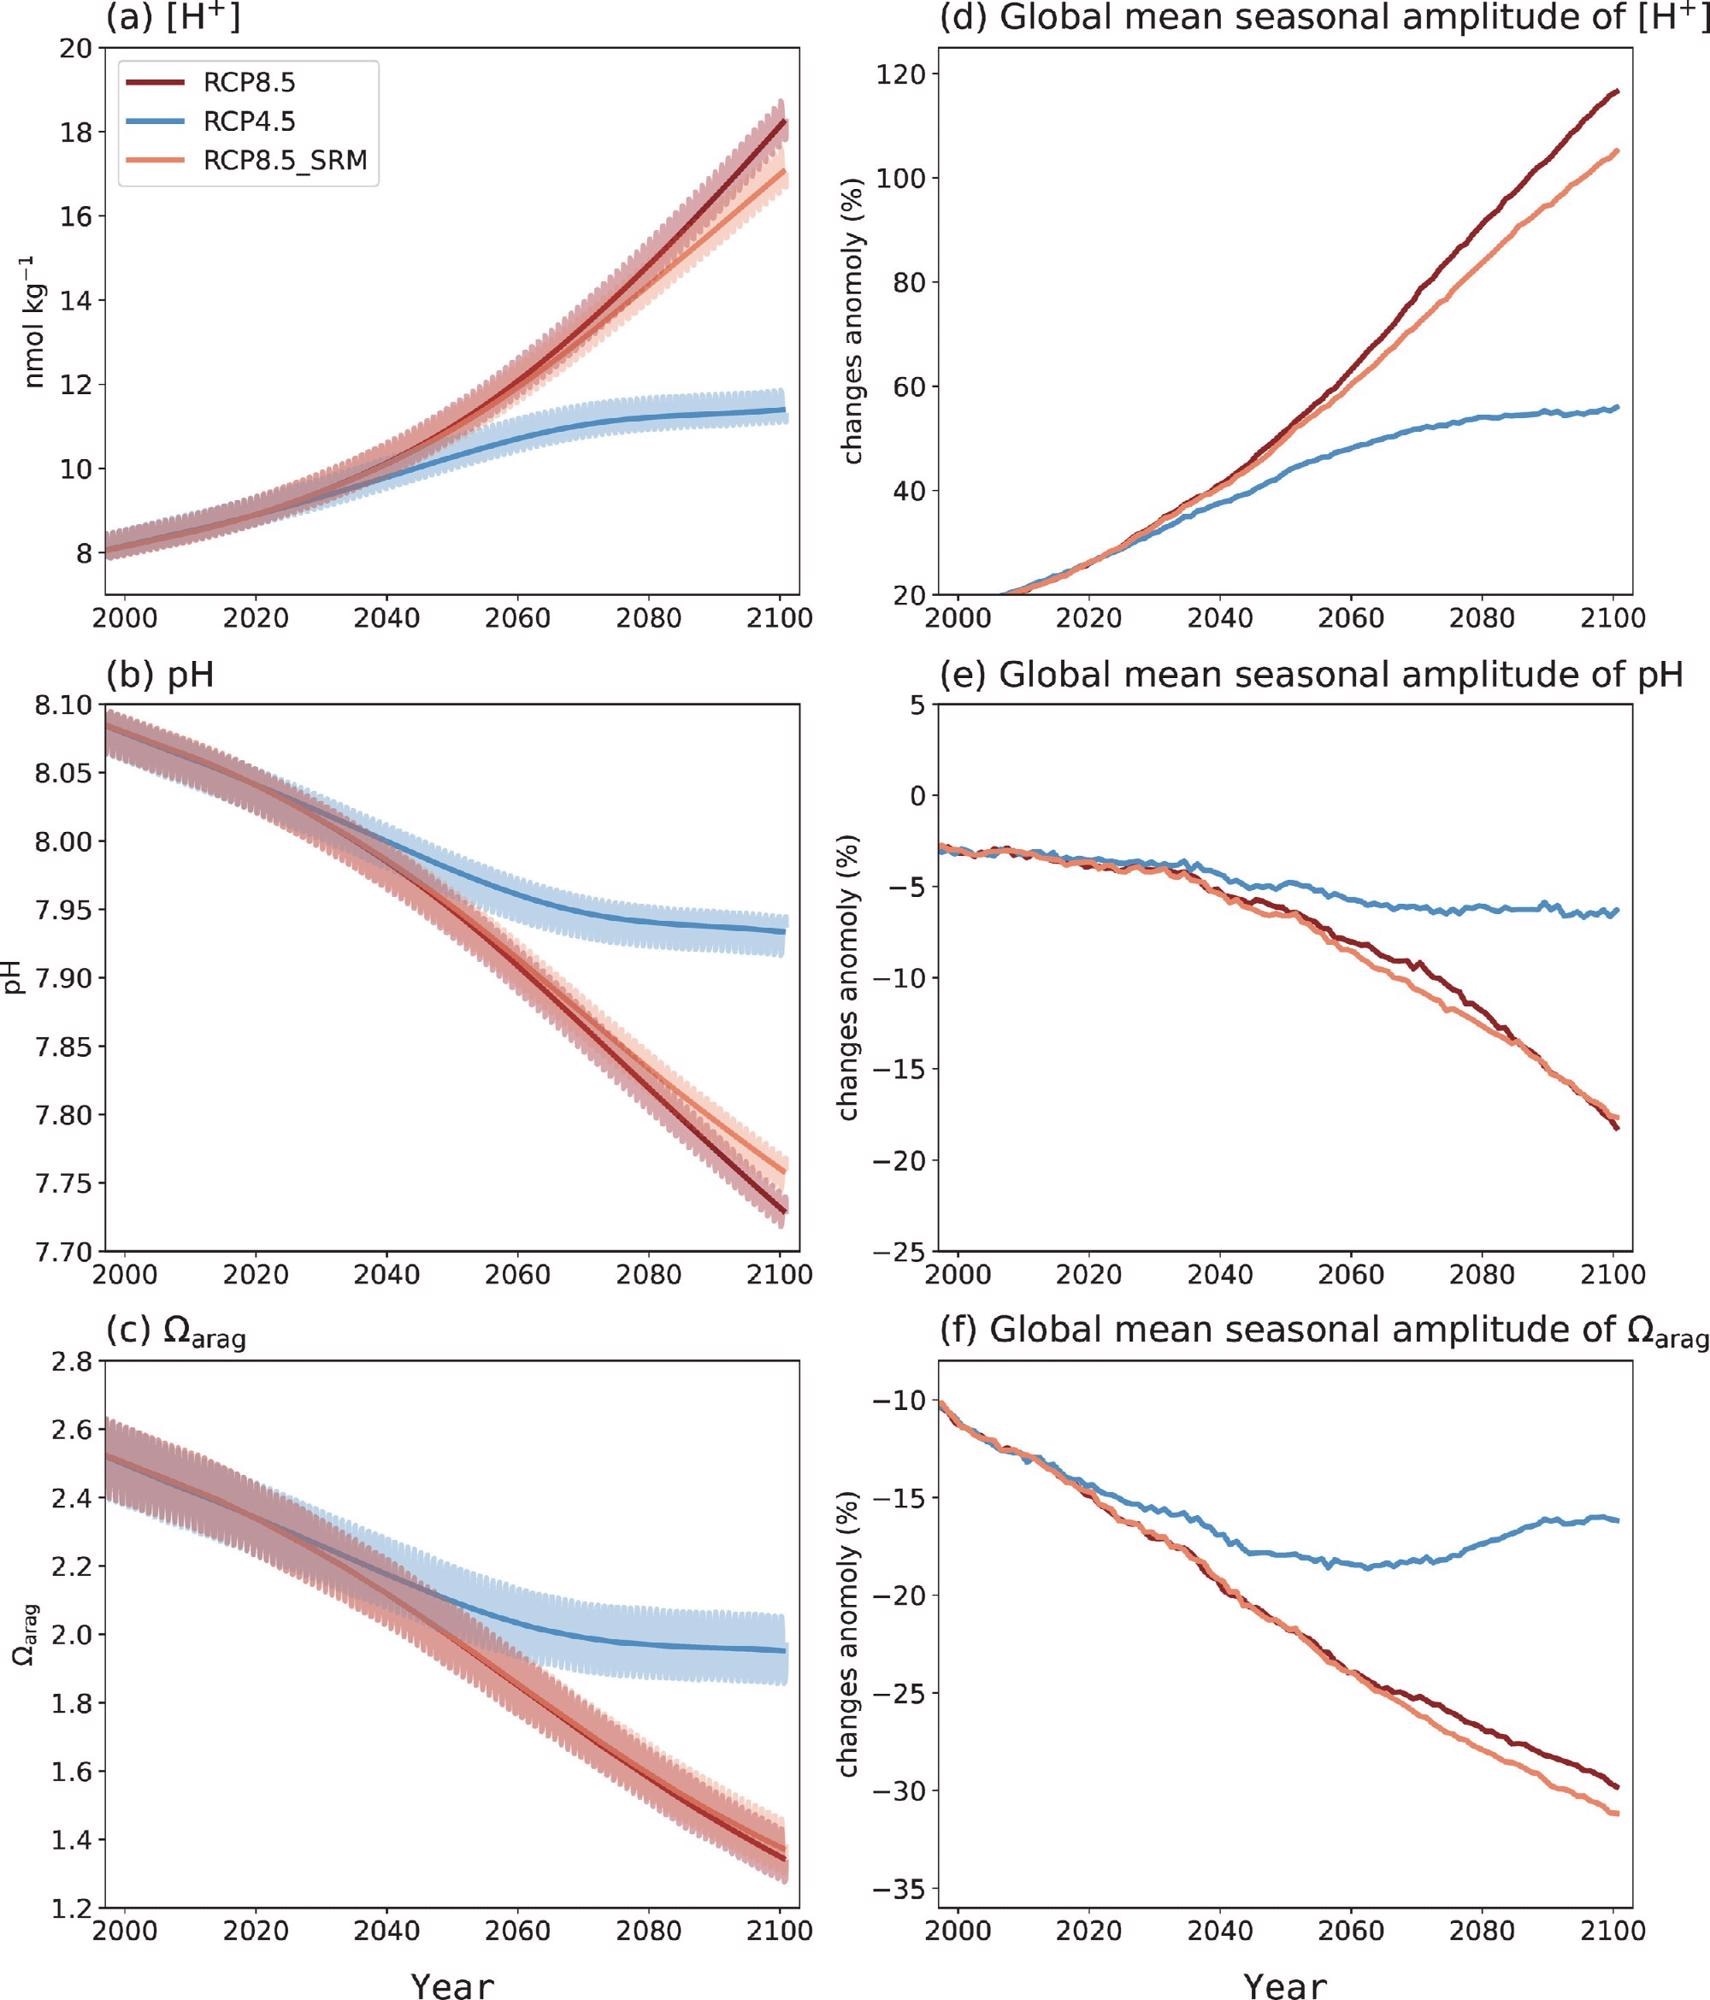 Model-simulated temporal evolution of key carbonate chemistry variables for the scenarios of RCP4.5, RCP8.5, and RCP8.5_SRM: (a–c) the global mean surface ocean (a) [H+], (b) pH, and (c) aragonite saturation, in which annual mean values are overplotted with monthly mean values; (d–f) the global mean change in the seasonal amplitude of (d) [H+], (e) pH, and (f) aragonite saturation.